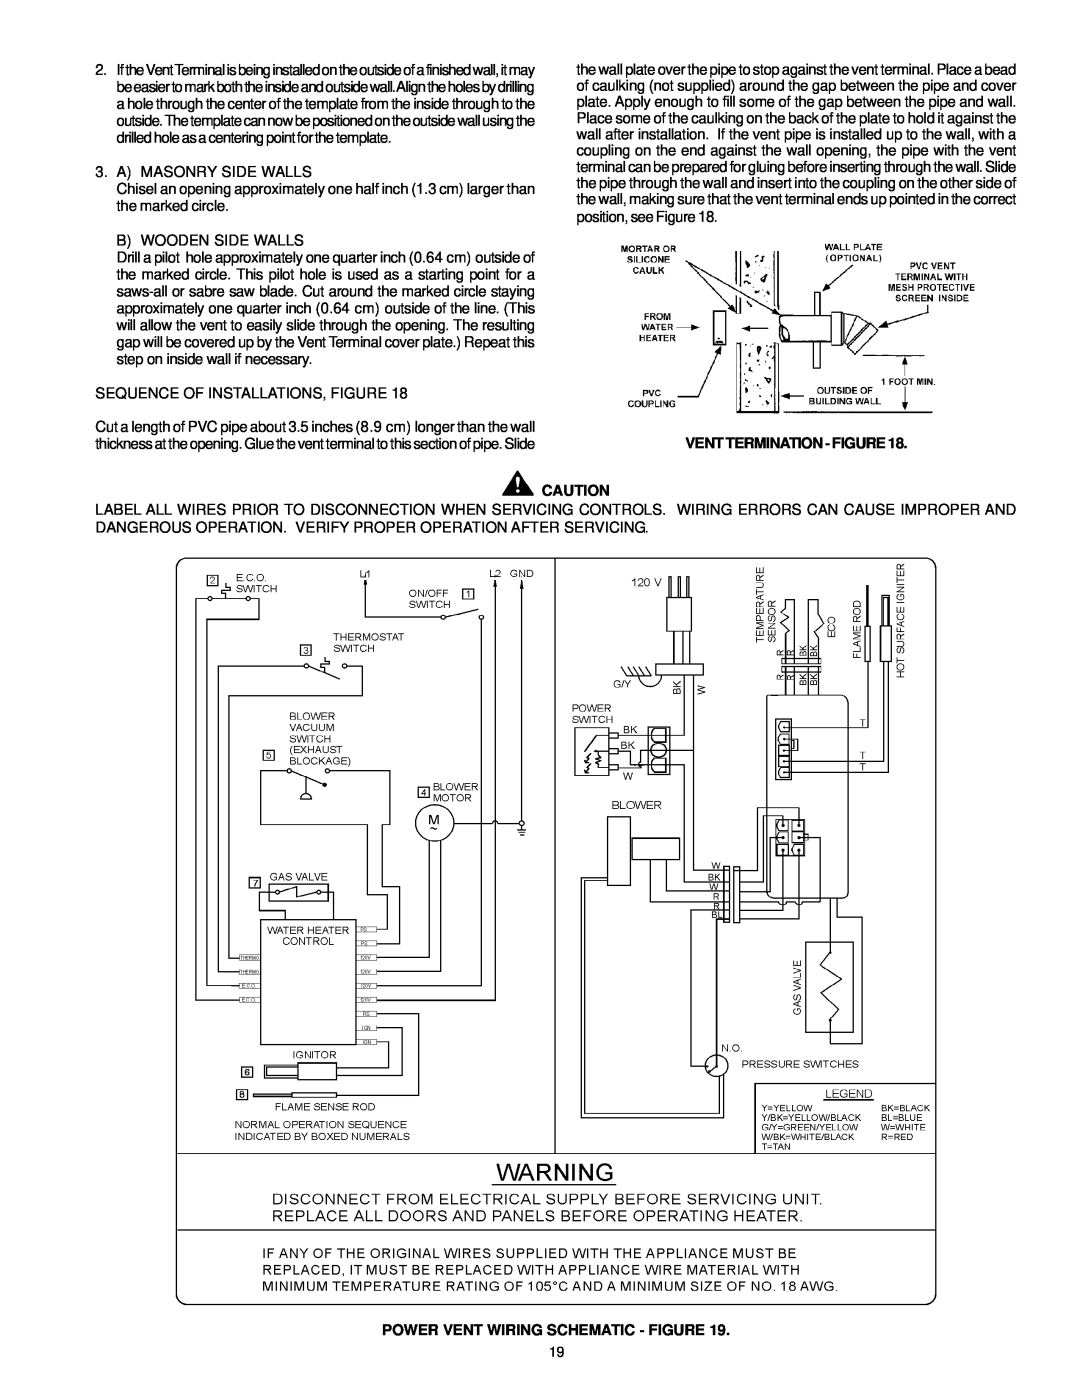 A.O. Smith ARGSS02708 instruction manual Vent Termination - Figure, Power Vent Wiring Schematic - Figure 